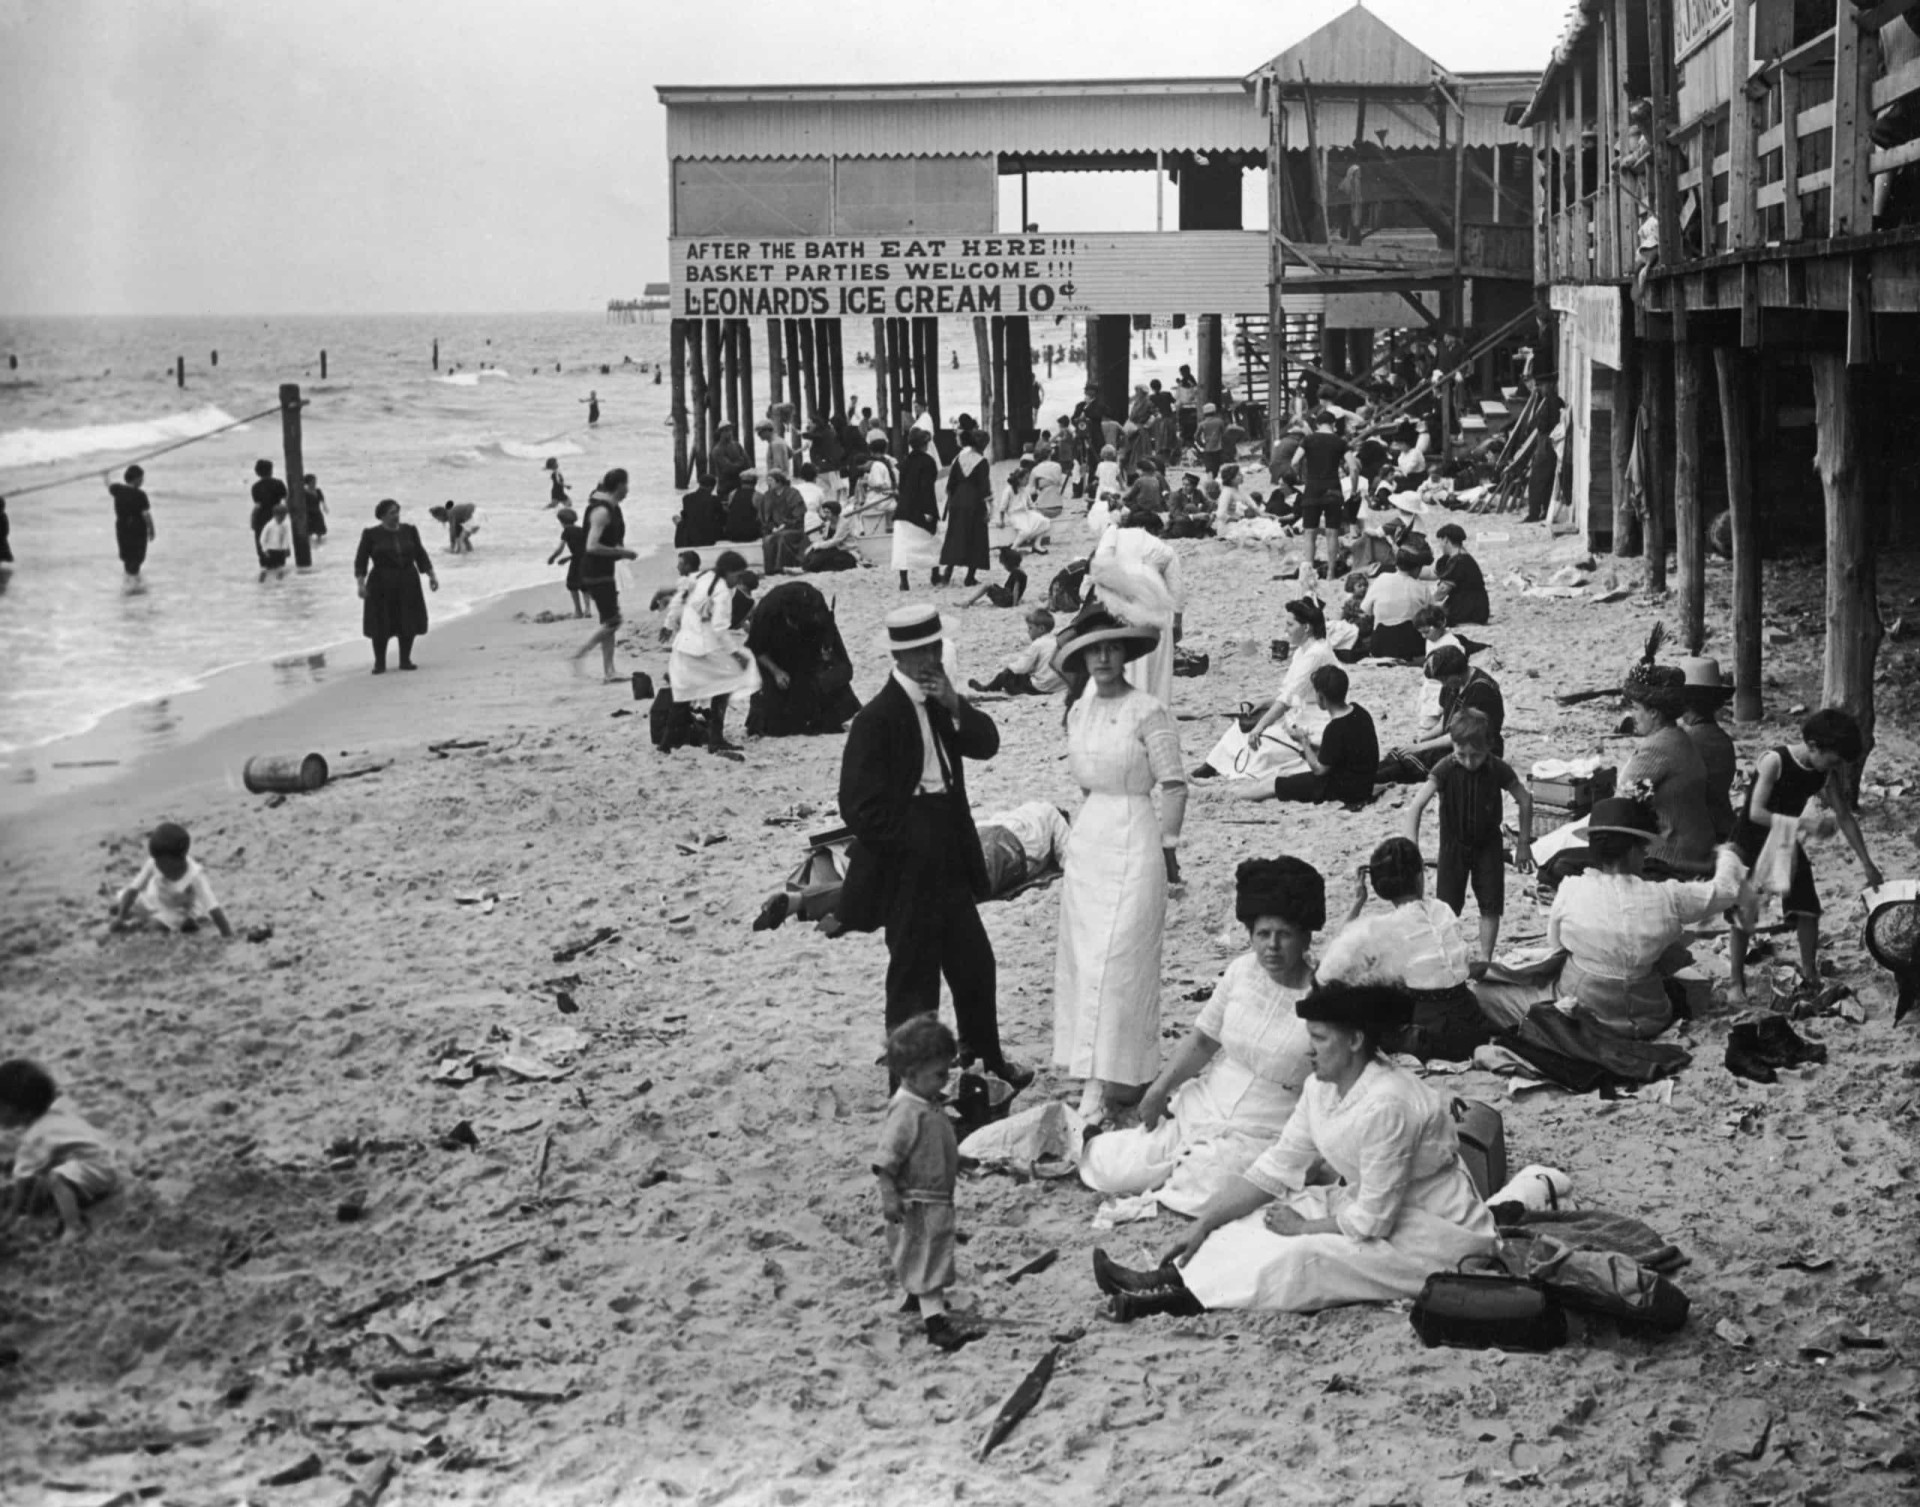 <p>Thanks to the mass production of cars as well as buses, the tourism industry continued to grow. Coastal tourism would rise in popularity after WWI, with people wanting to visit the seaside.</p><p><a href="https://www.msn.com/en-us/community/channel/vid-7xx8mnucu55yw63we9va2gwr7uihbxwc68fxqp25x6tg4ftibpra?cvid=94631541bc0f4f89bfd59158d696ad7e">Follow us and access great exclusive content every day</a></p>